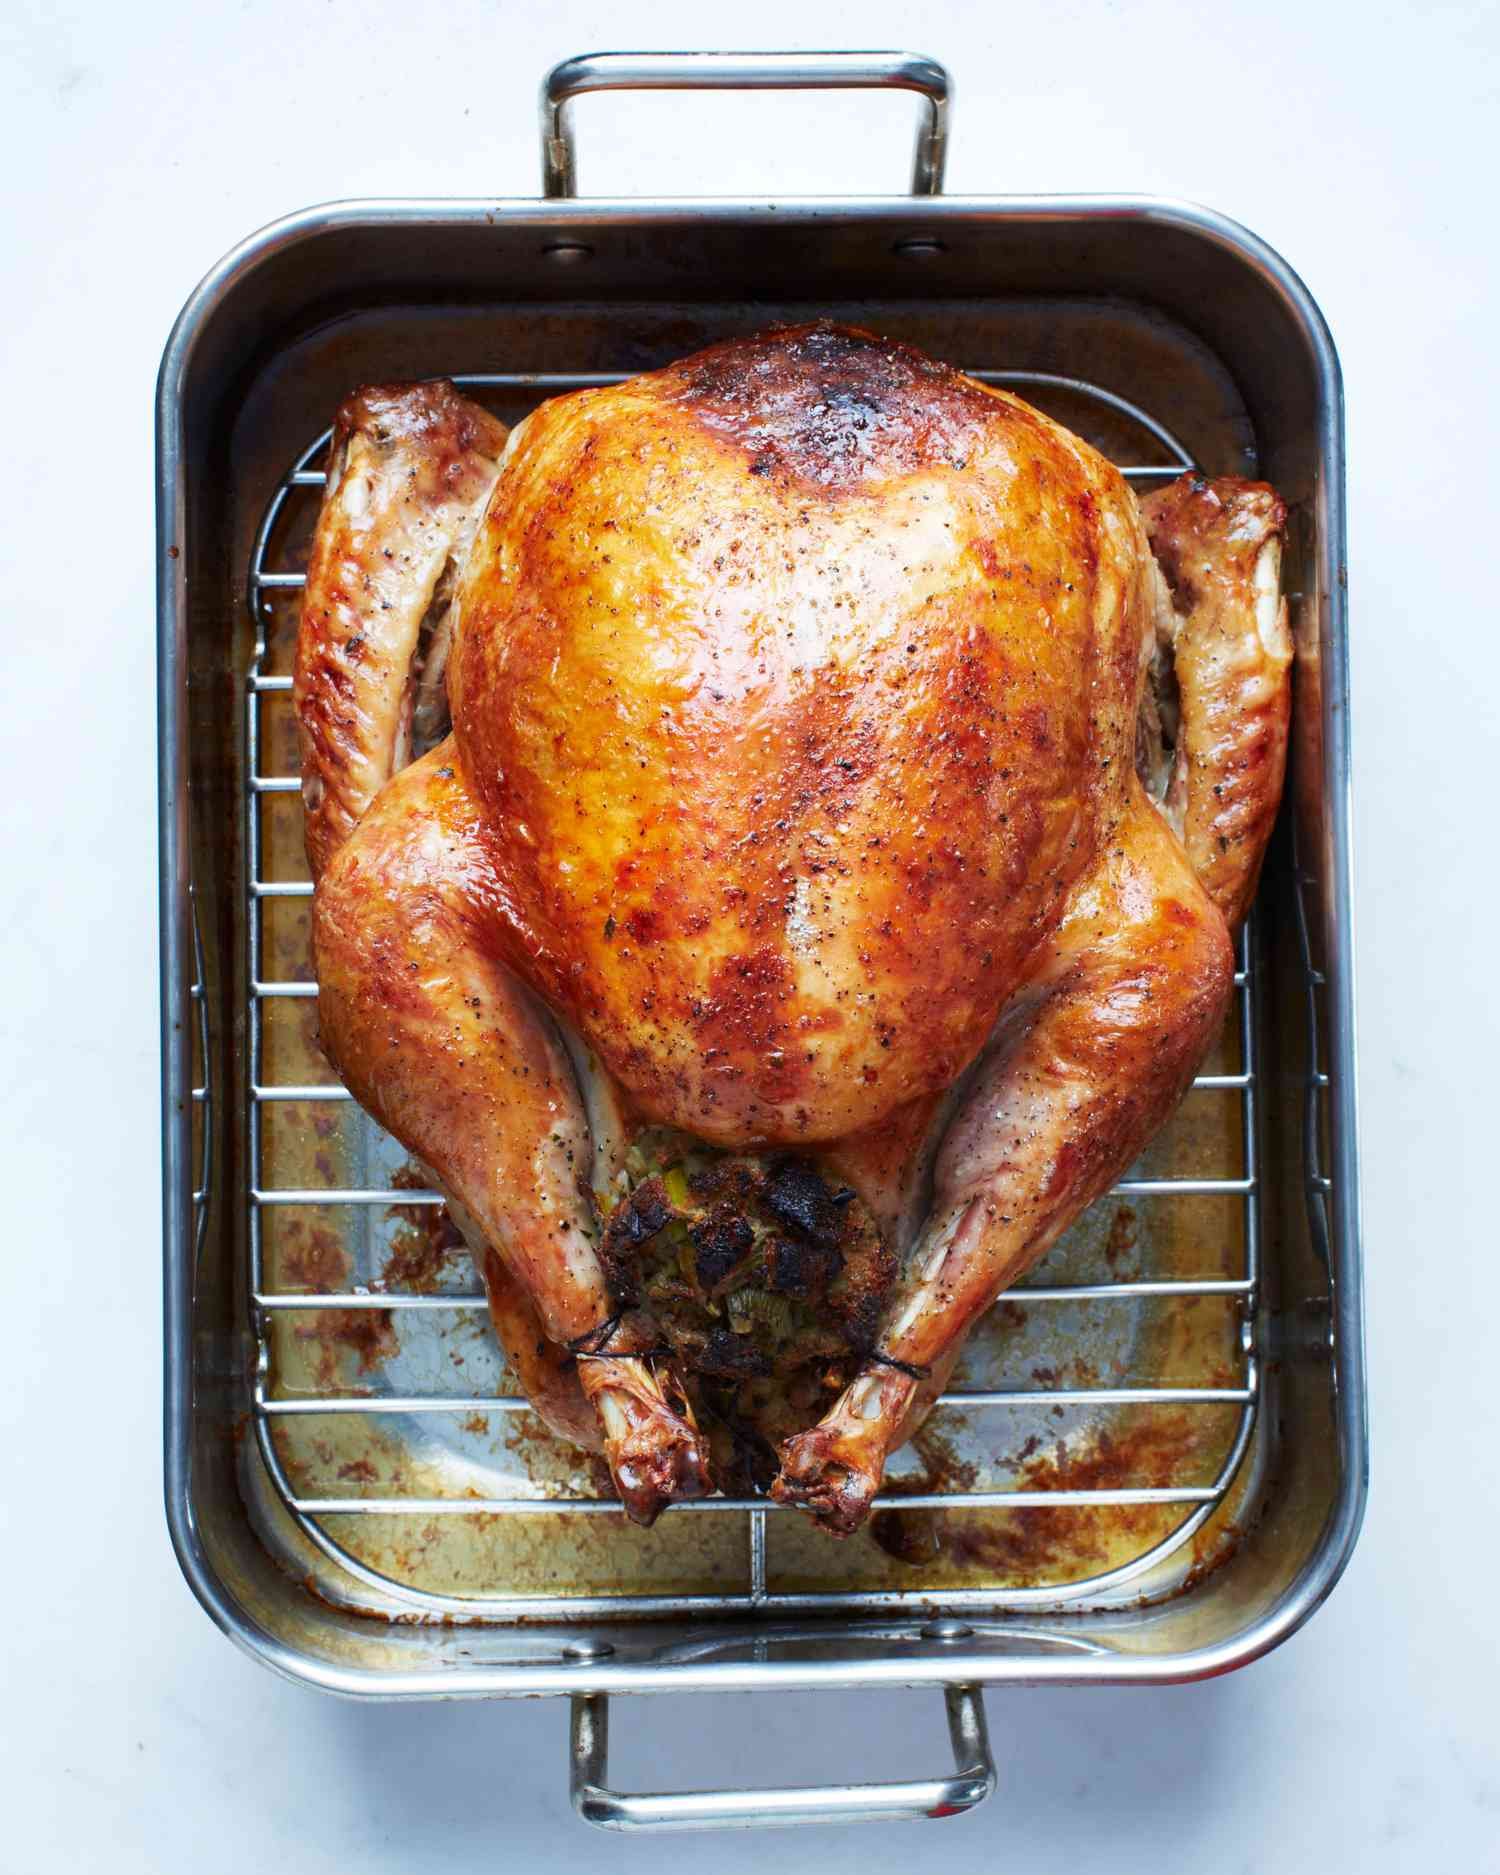 4 Common Thanksgiving Turkey Mistakes Home Cooks Make—Plus, How to Avoid Them